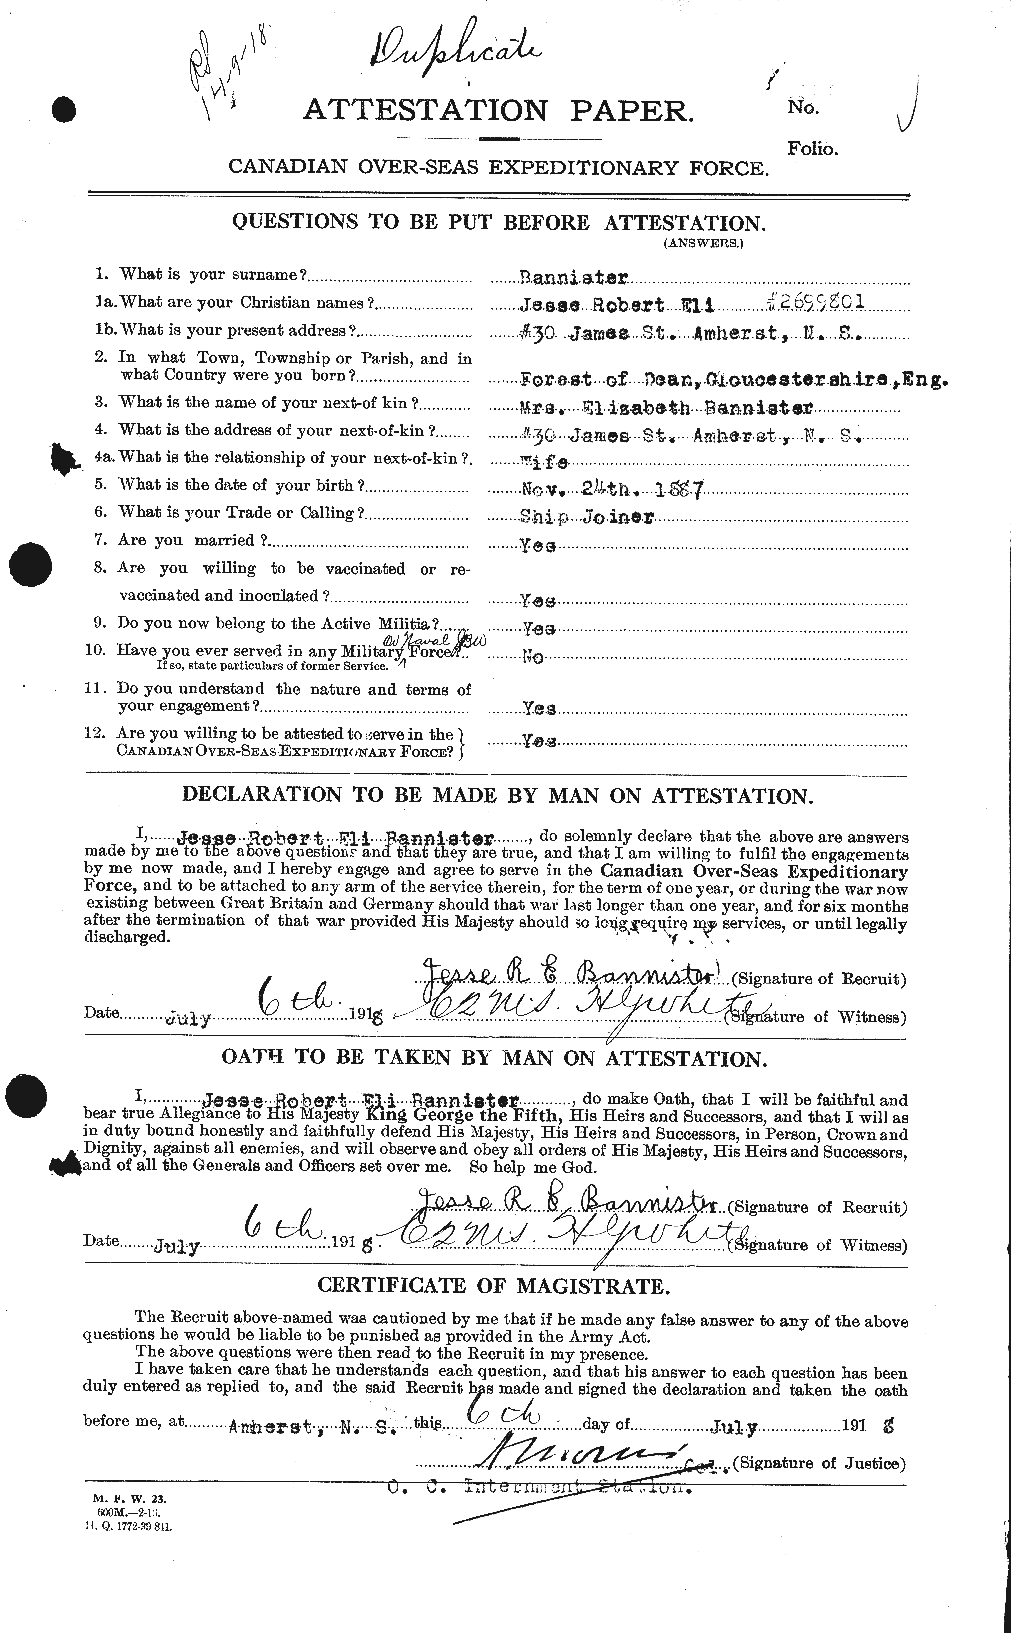 Personnel Records of the First World War - CEF 224779a